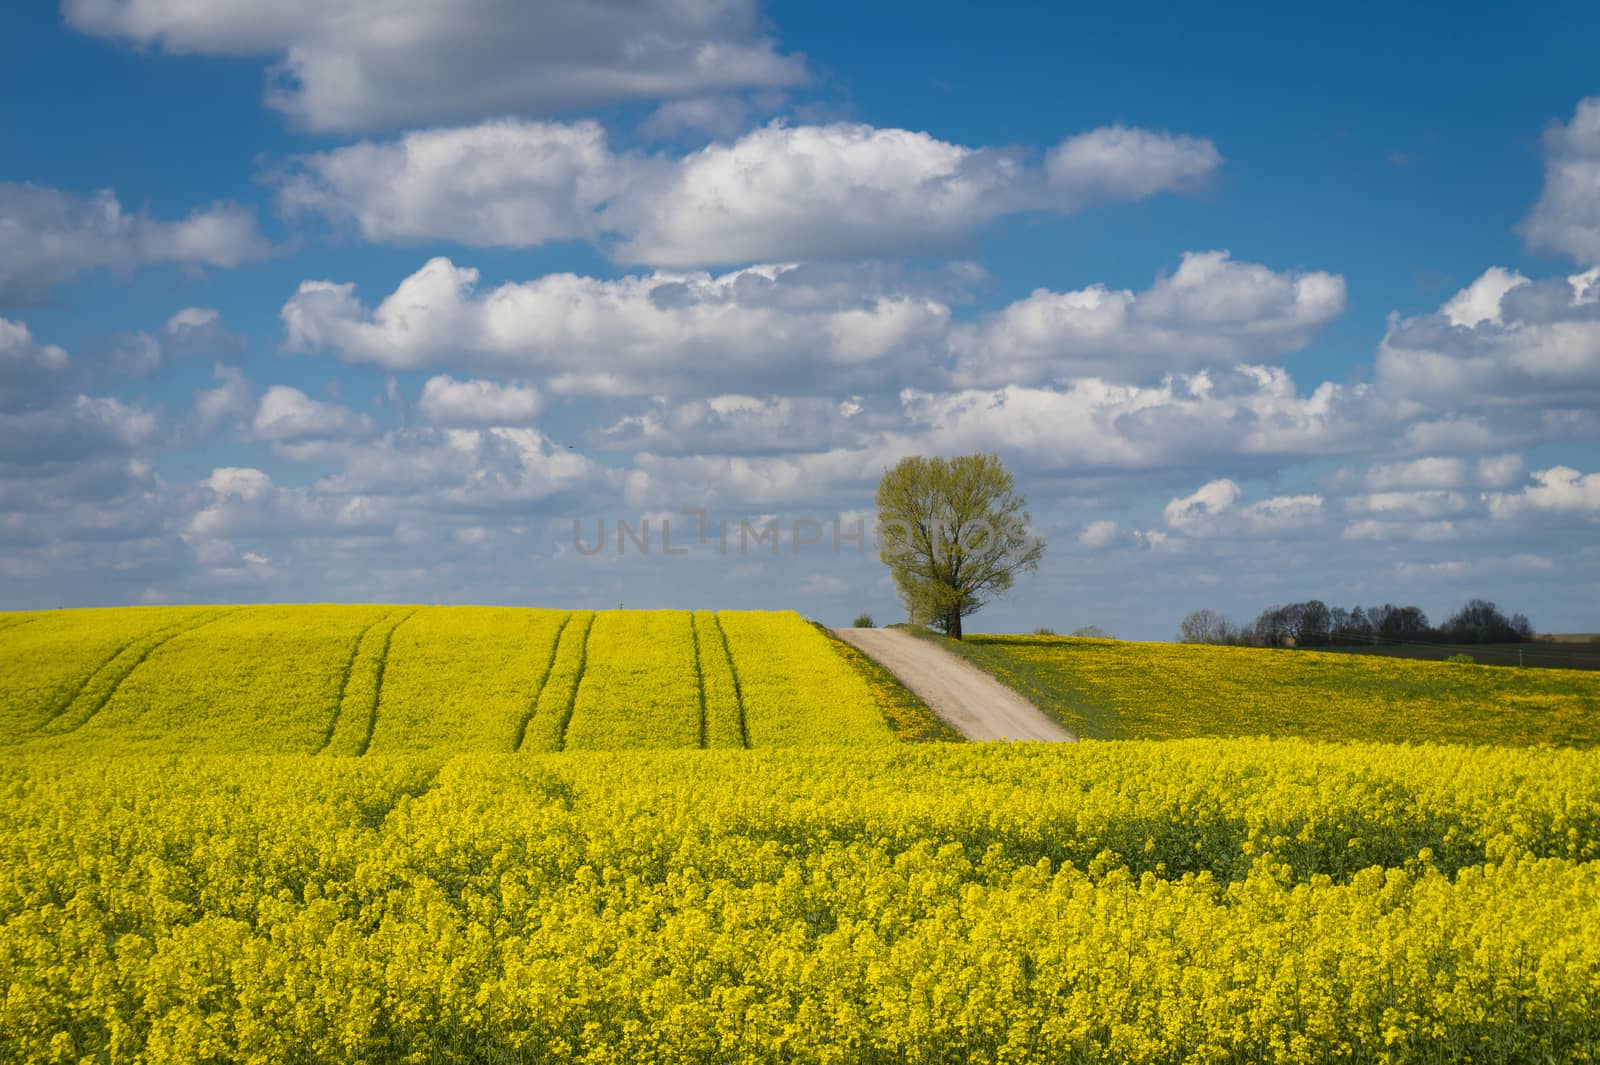 Flowering field of bright yellow rapeseed, canola or colza with tyre tracks from a farm vehicle under a sunny blue sky and white clouds